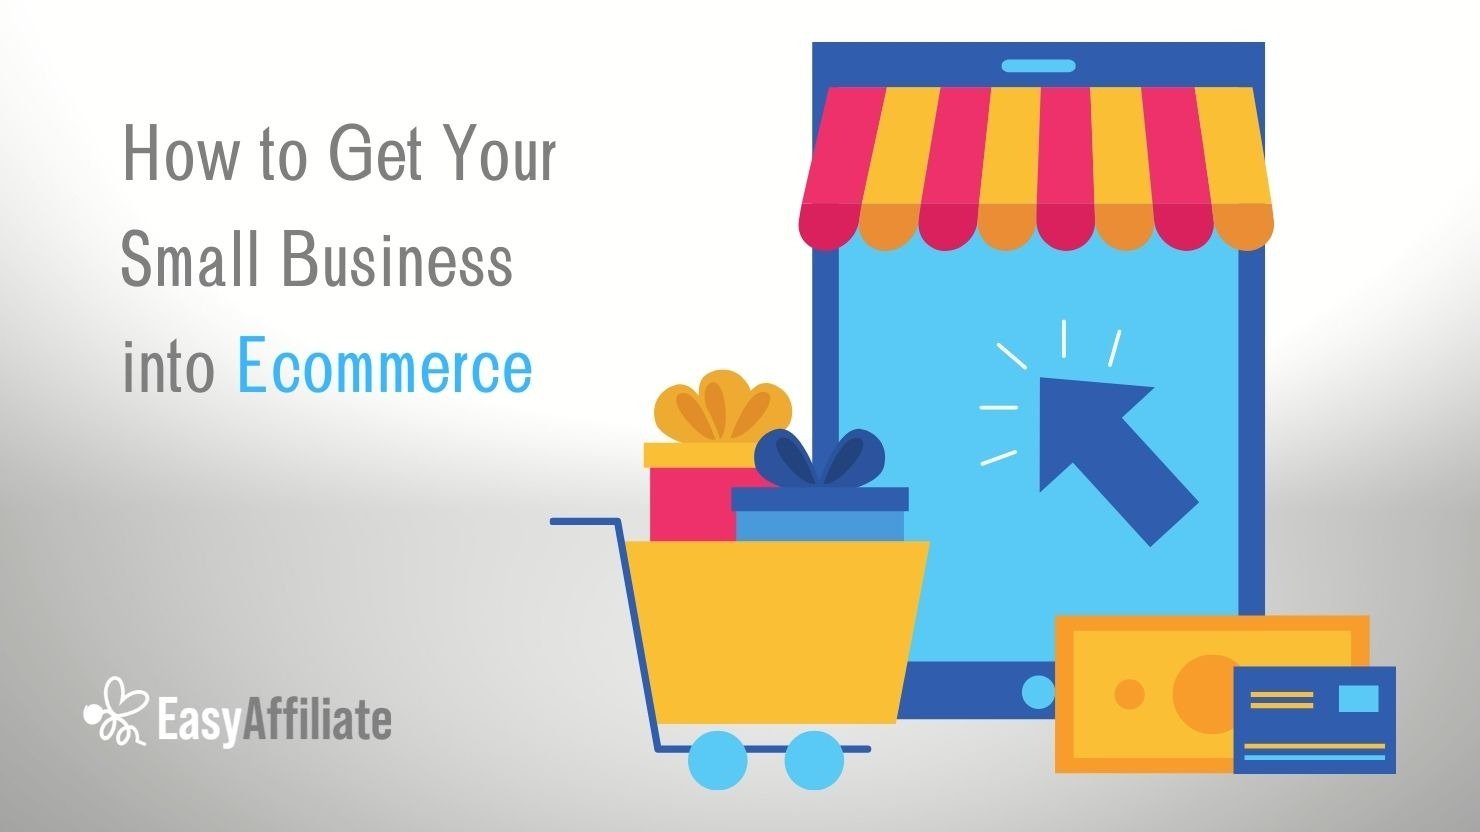 How to get your small business into ecommerce